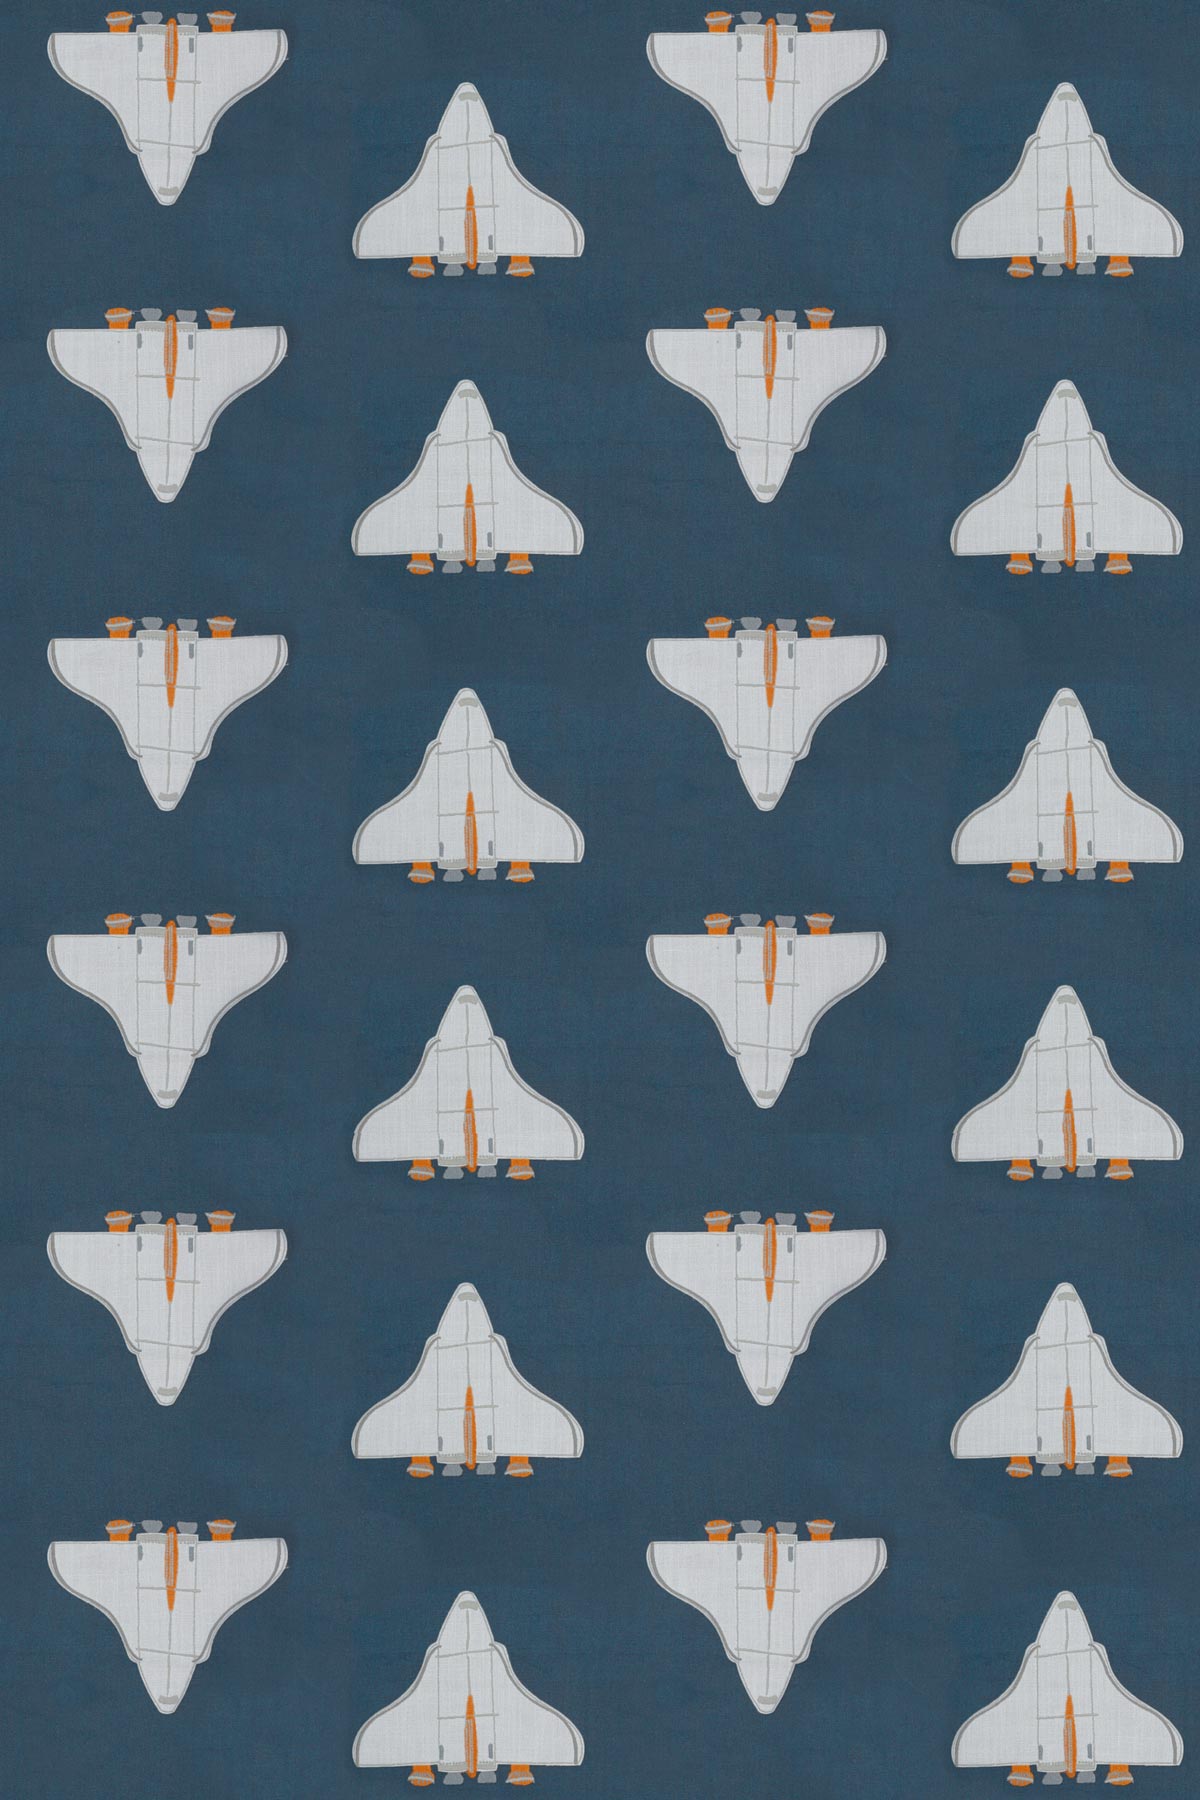 Space shuttle Fabric - Navy / Apricot - by Harlequin